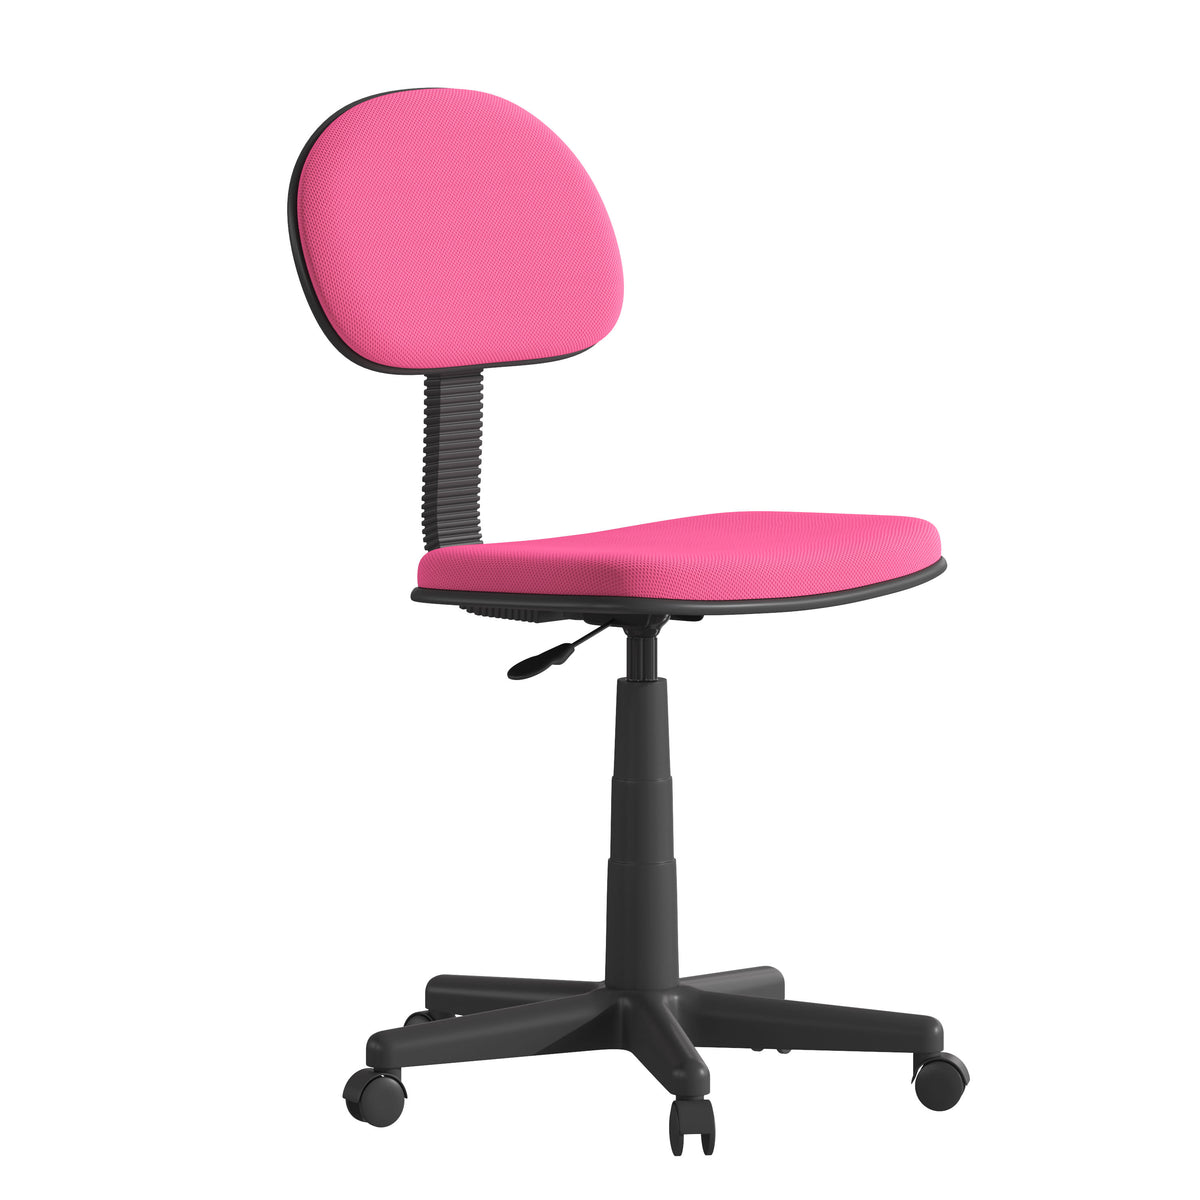 Dark Pink |#| Dark Pink Adjustable Mesh Swivel Task Office Chair with Padded Back and Seat